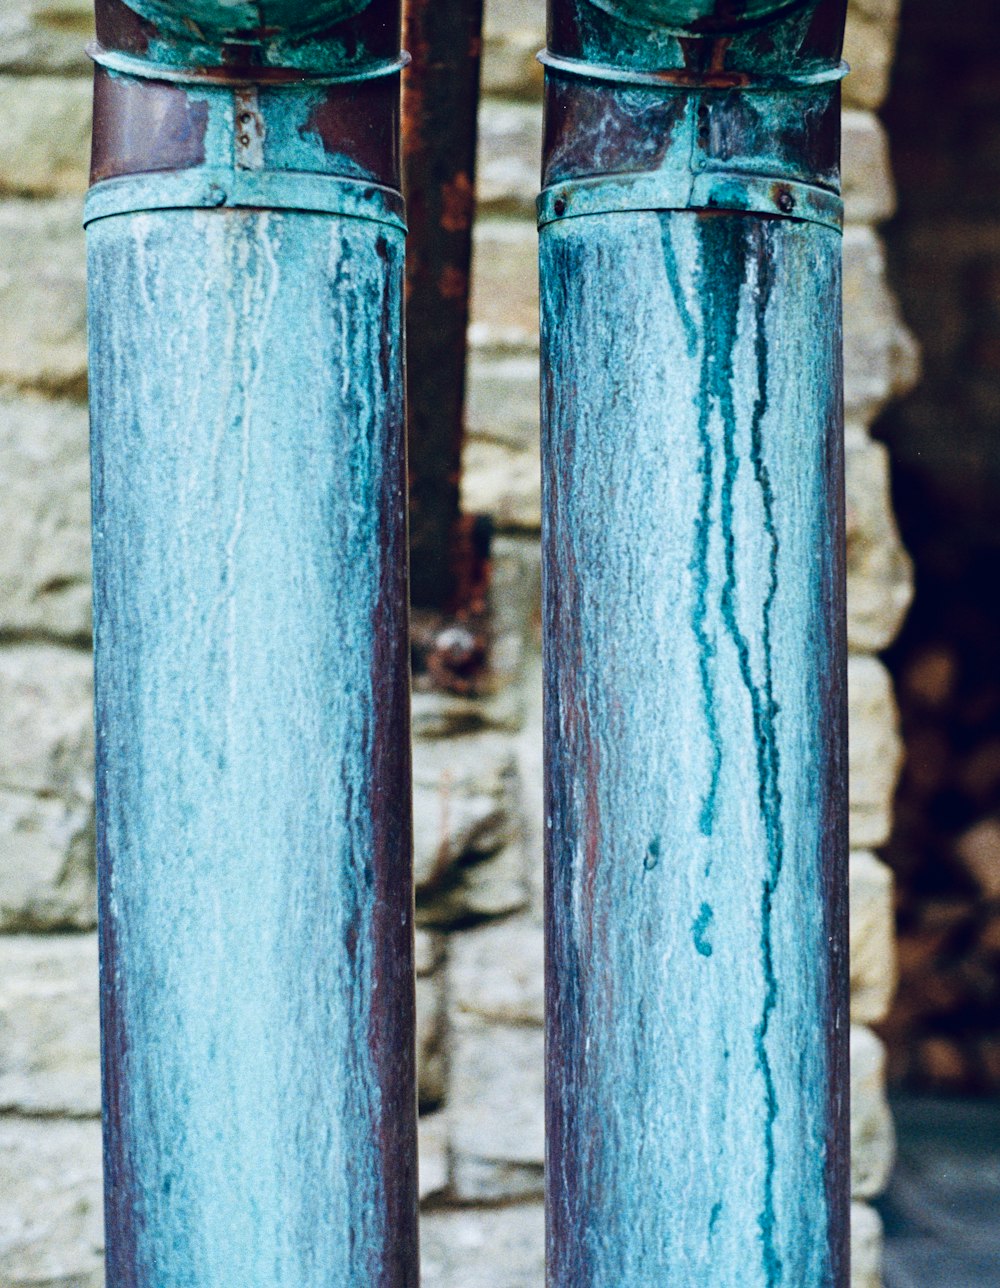 a close up of two metal pipes near a brick wall